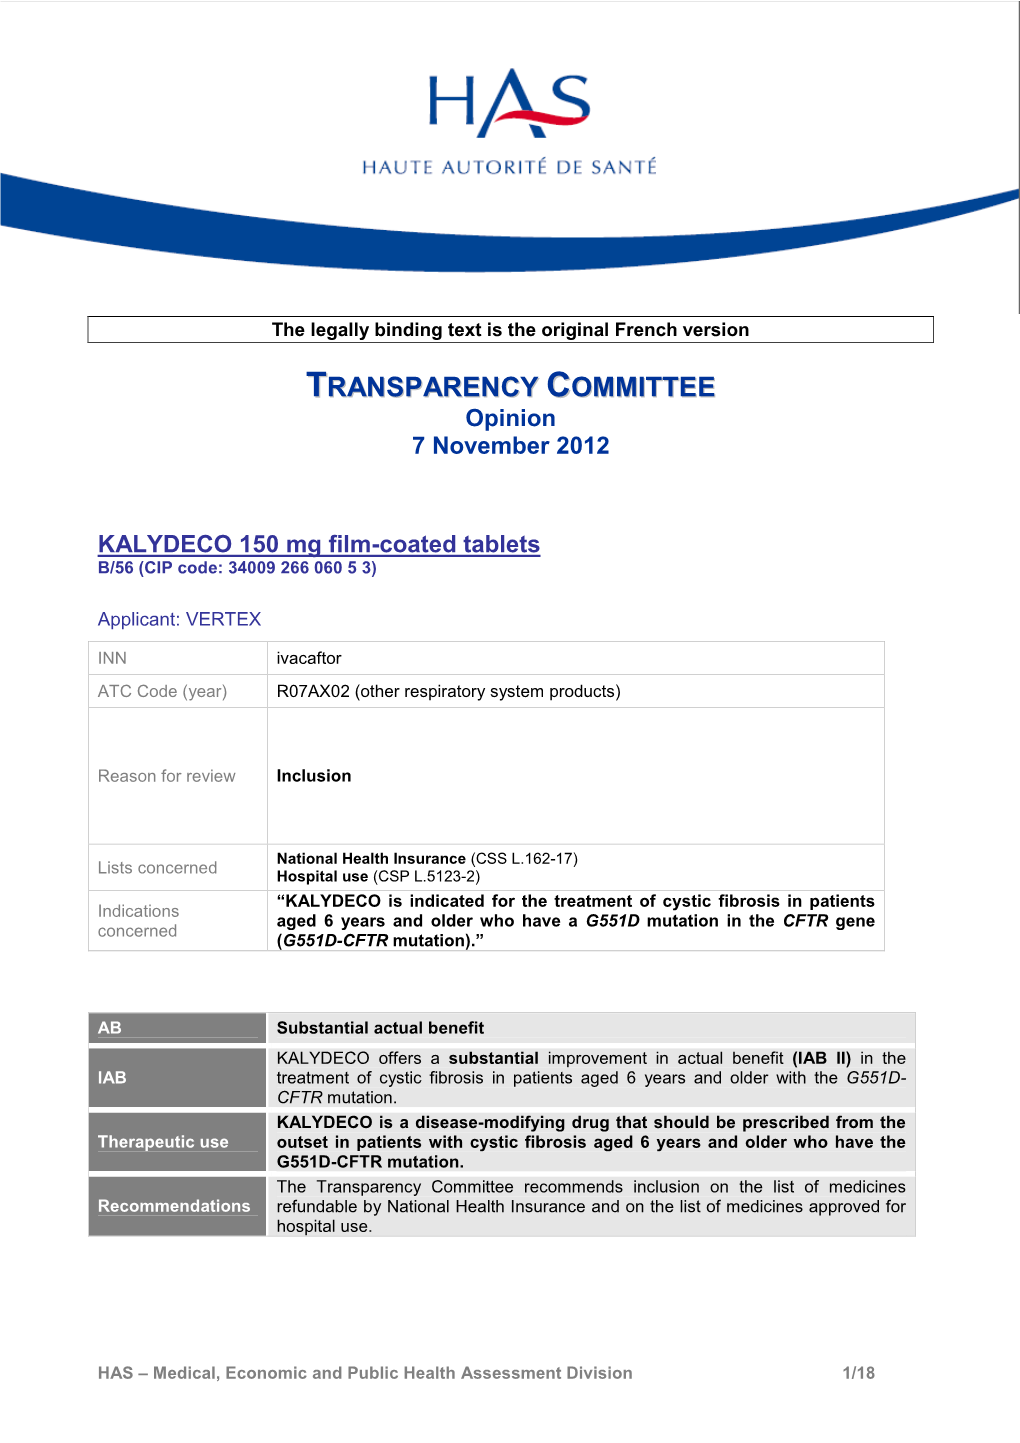 TRANSPARENCY COMMITTEE Opinion 7 November 2012